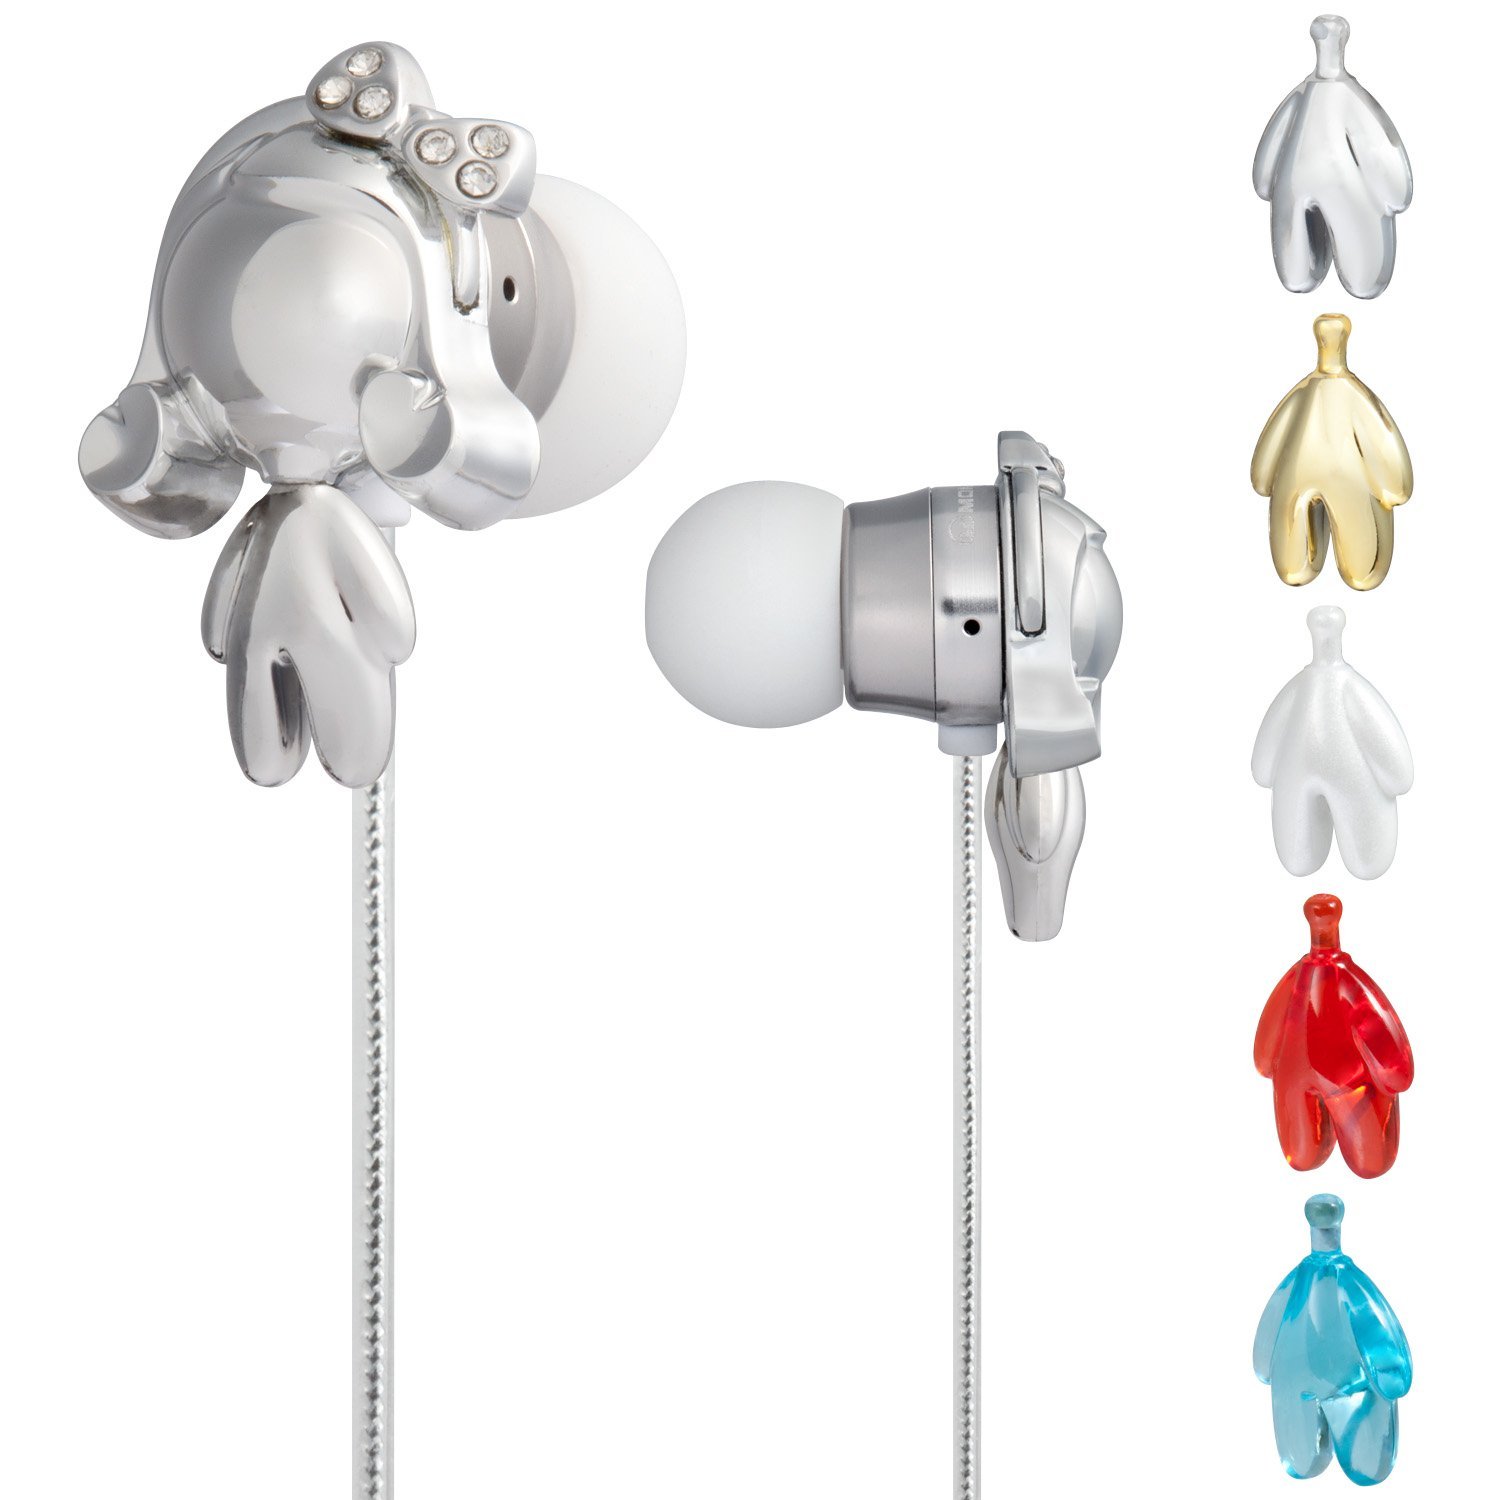 Monster Harajuku Lovers Space Age In-Ear Headphones Featuring Interchangeable Gwen Bodies $25